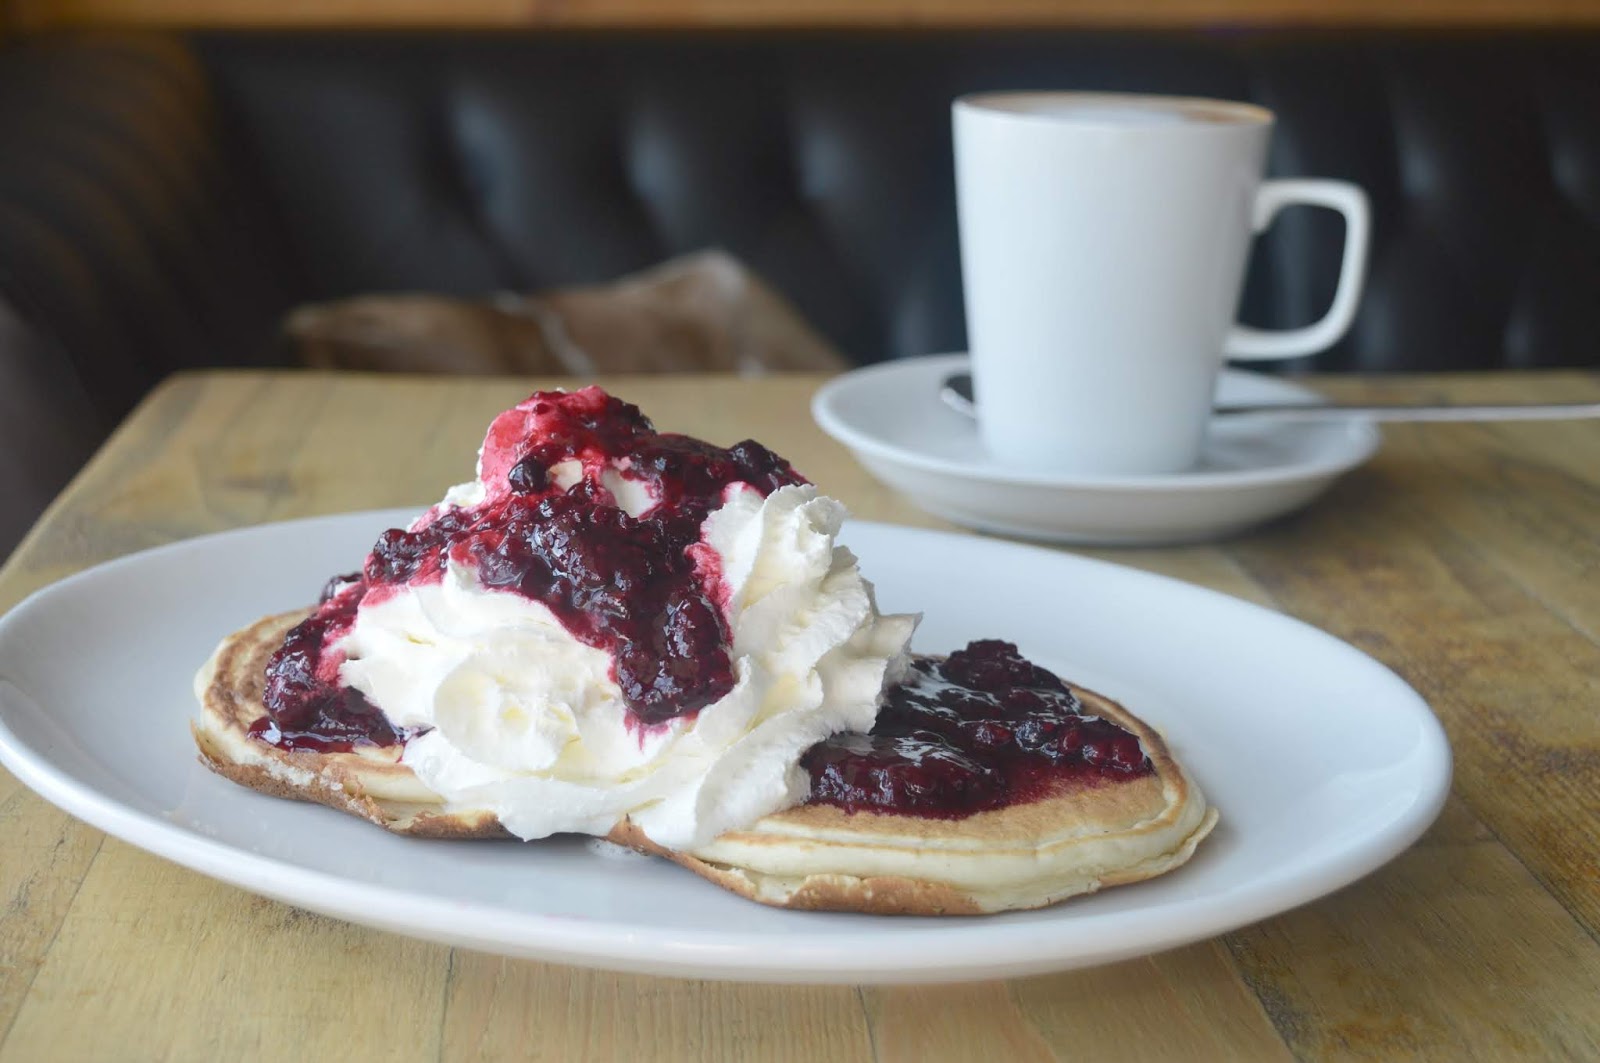 Best Pancakes in North East on Pancake Day - Cafe 19